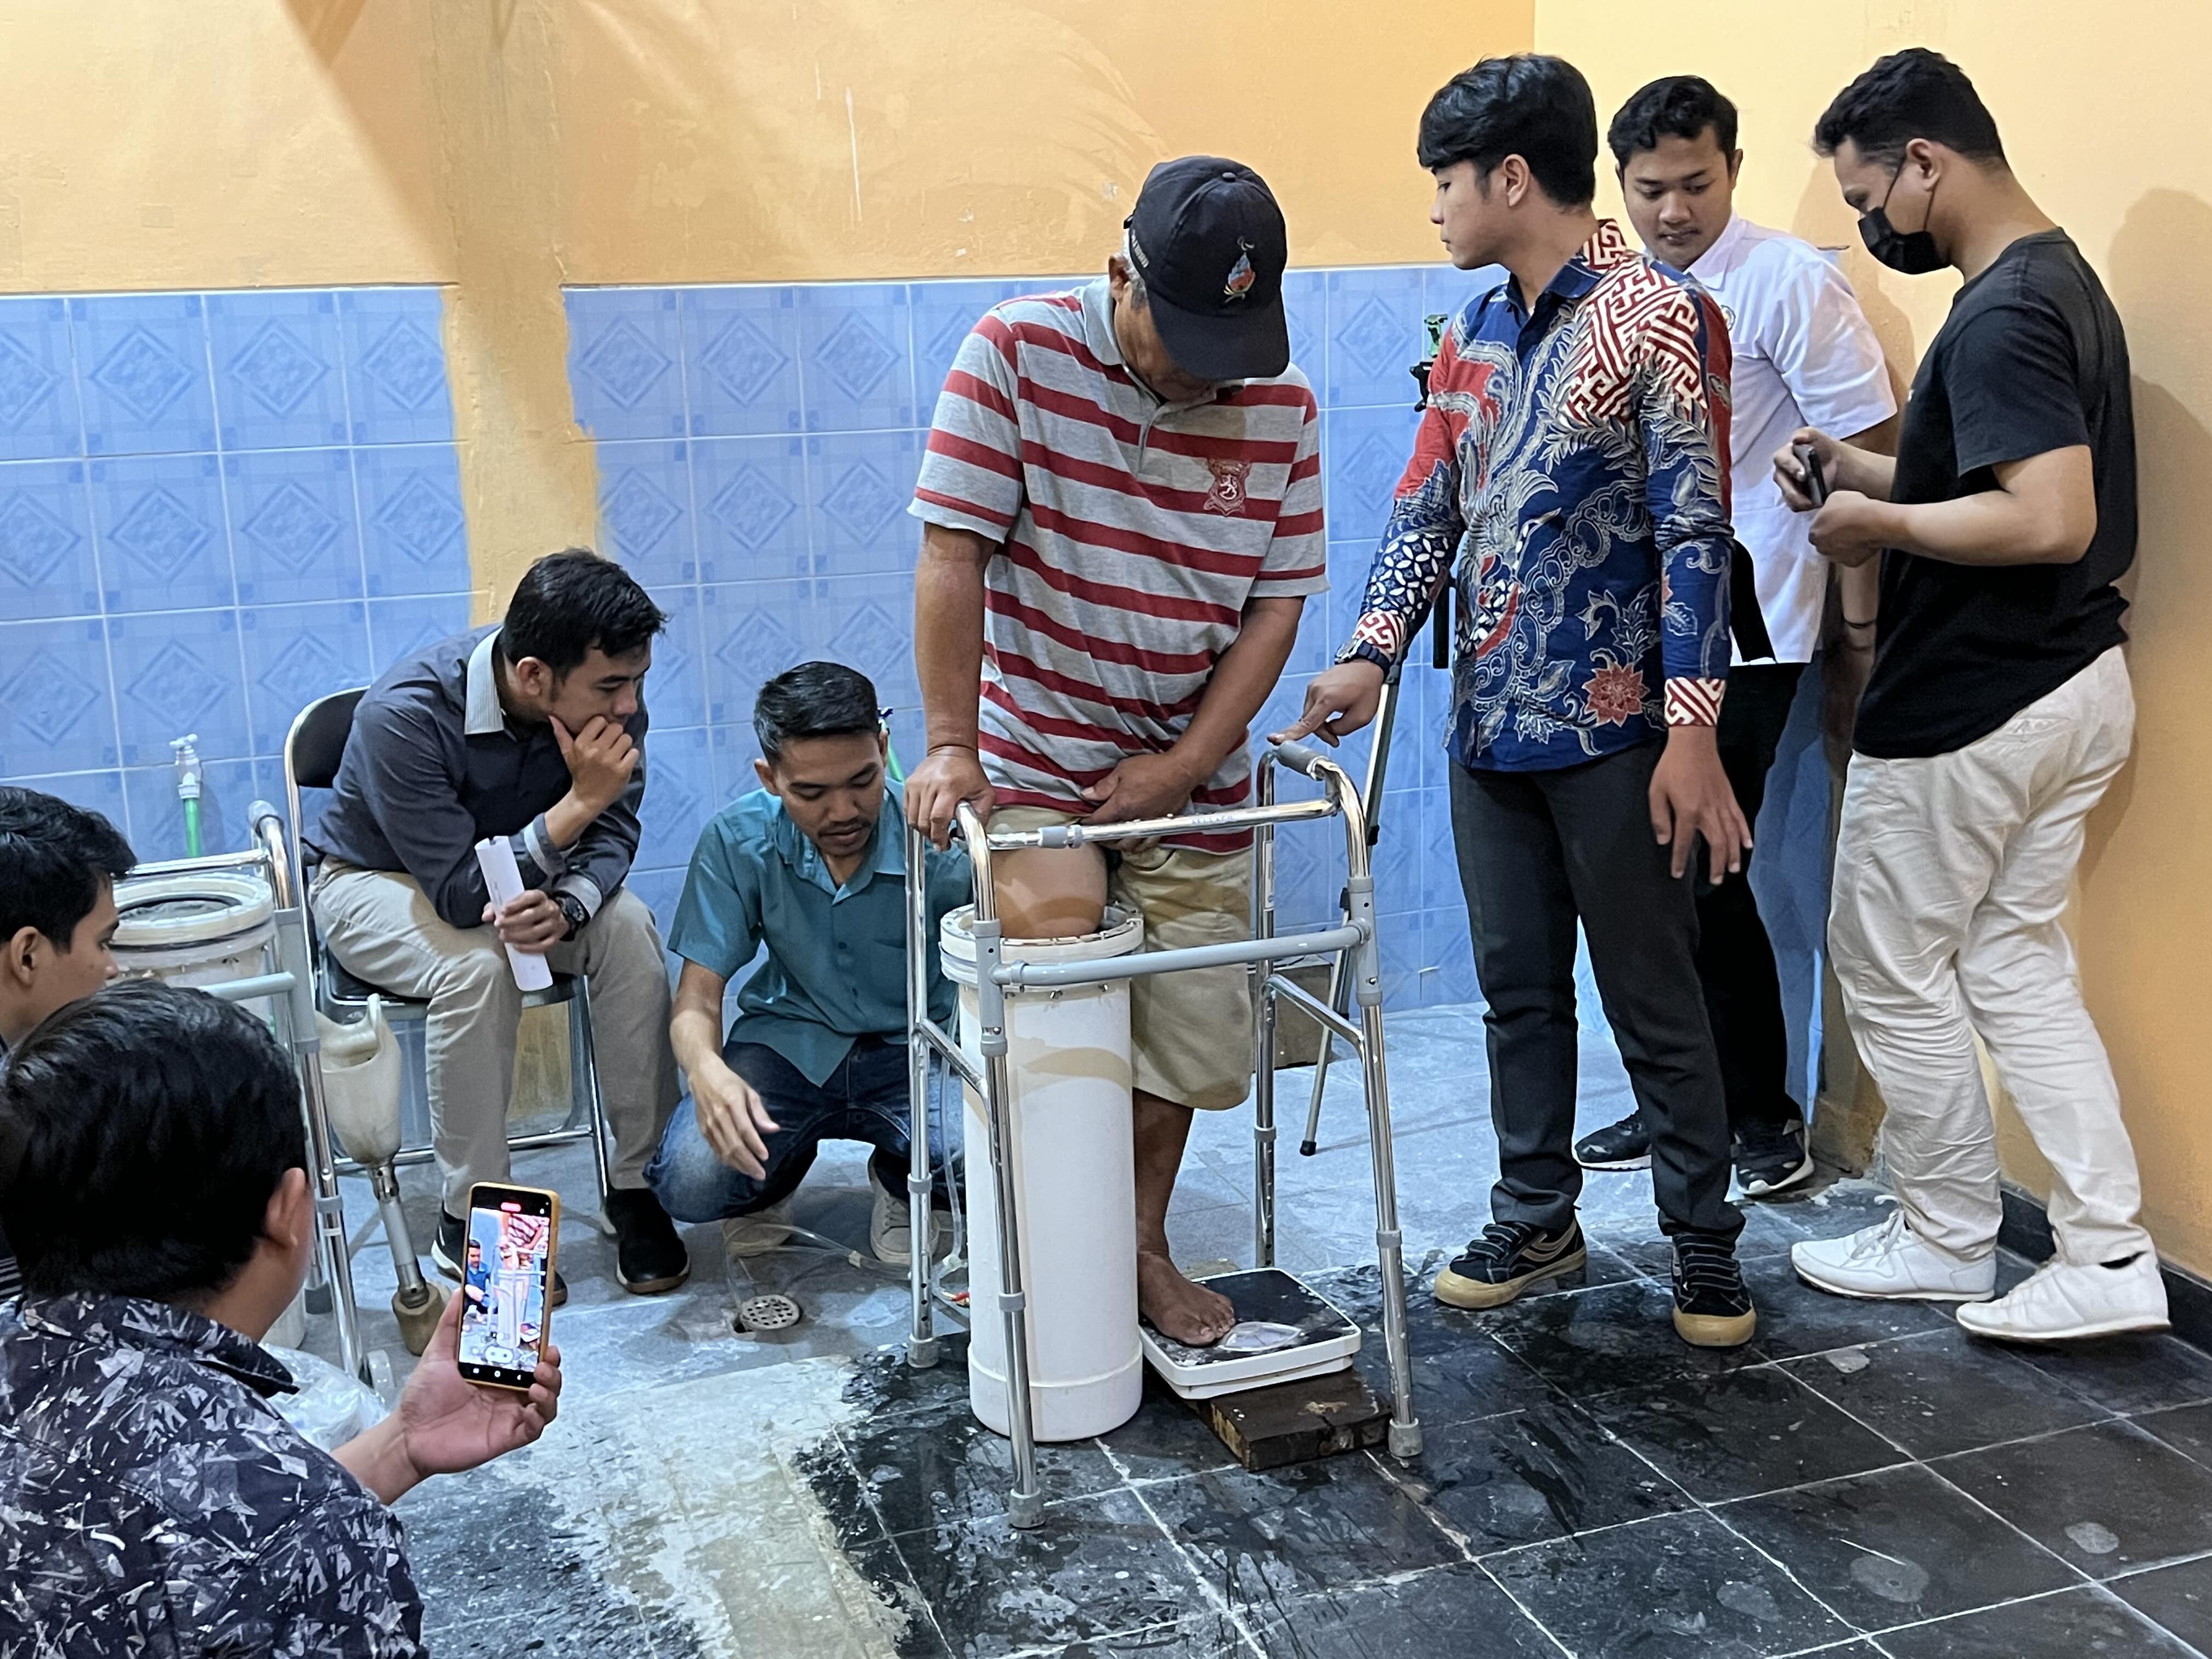 A group of people watching the process of making a prosthetic leg